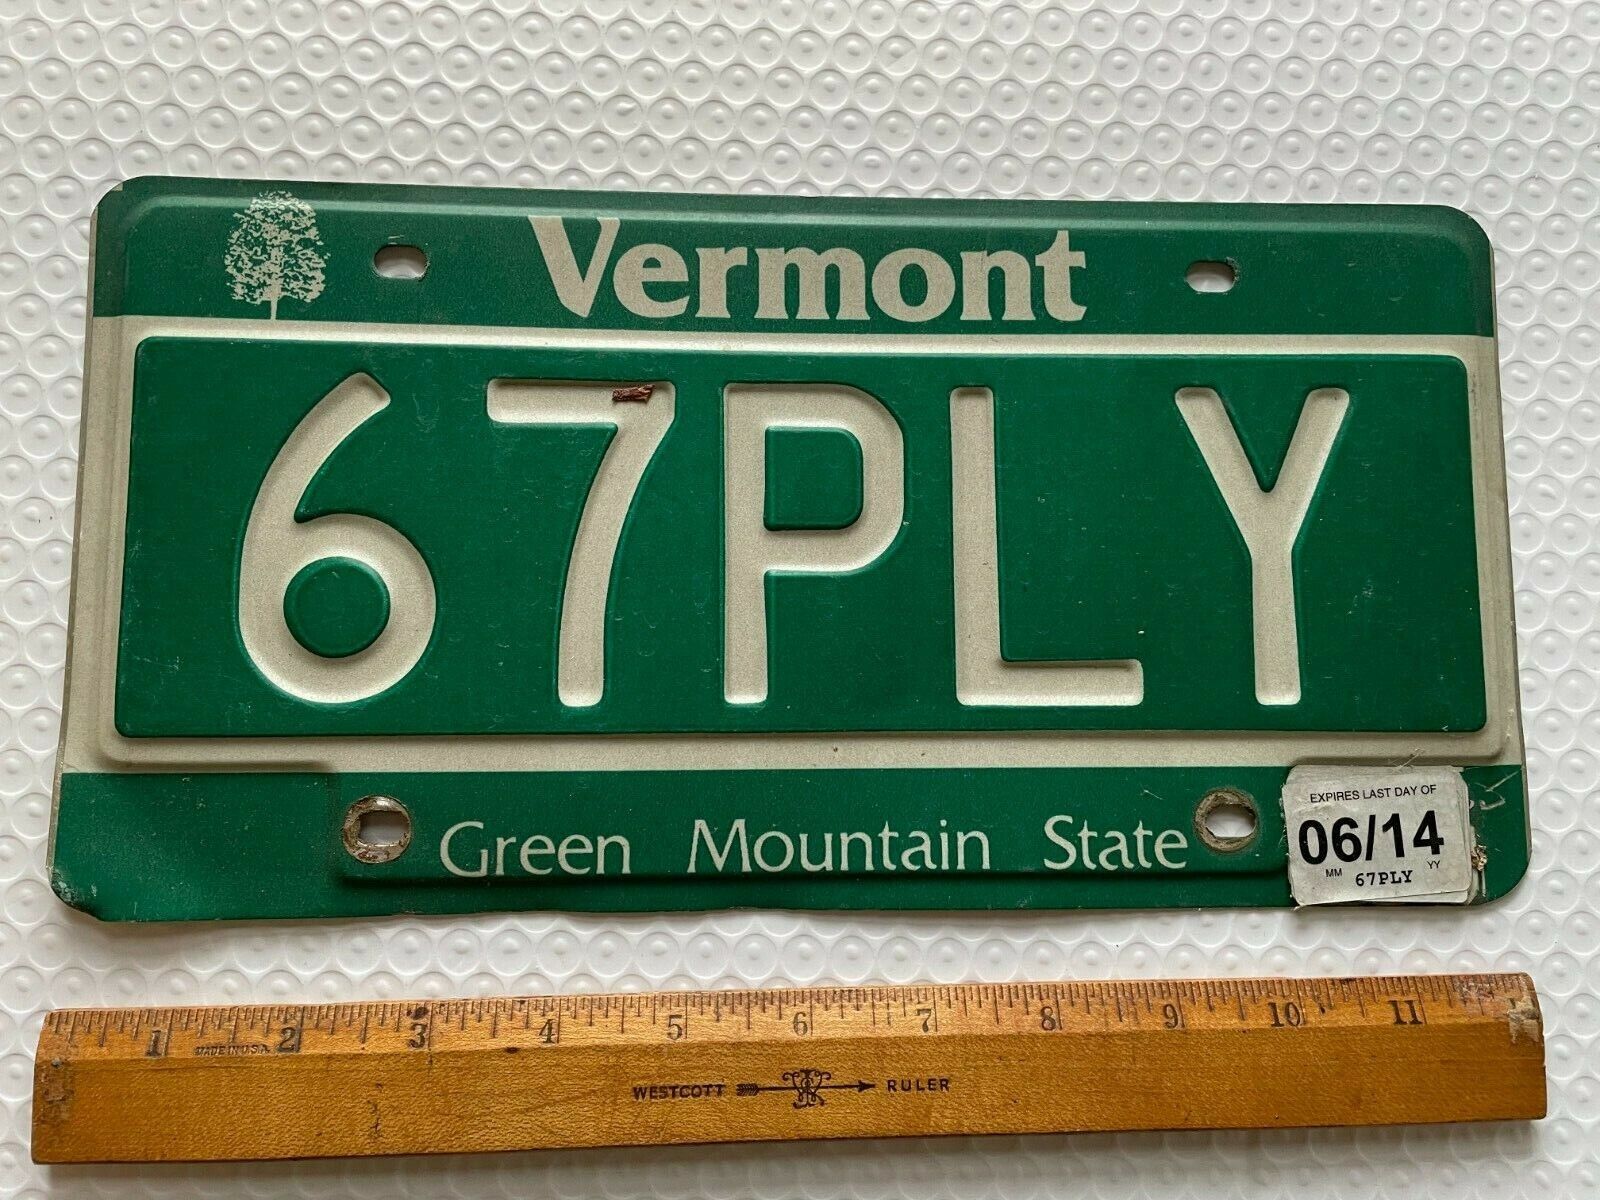 Vermont Vt Vanity License Plate 67ply 67 1967 Plymouth Gtx Classic Car Auto (vv1